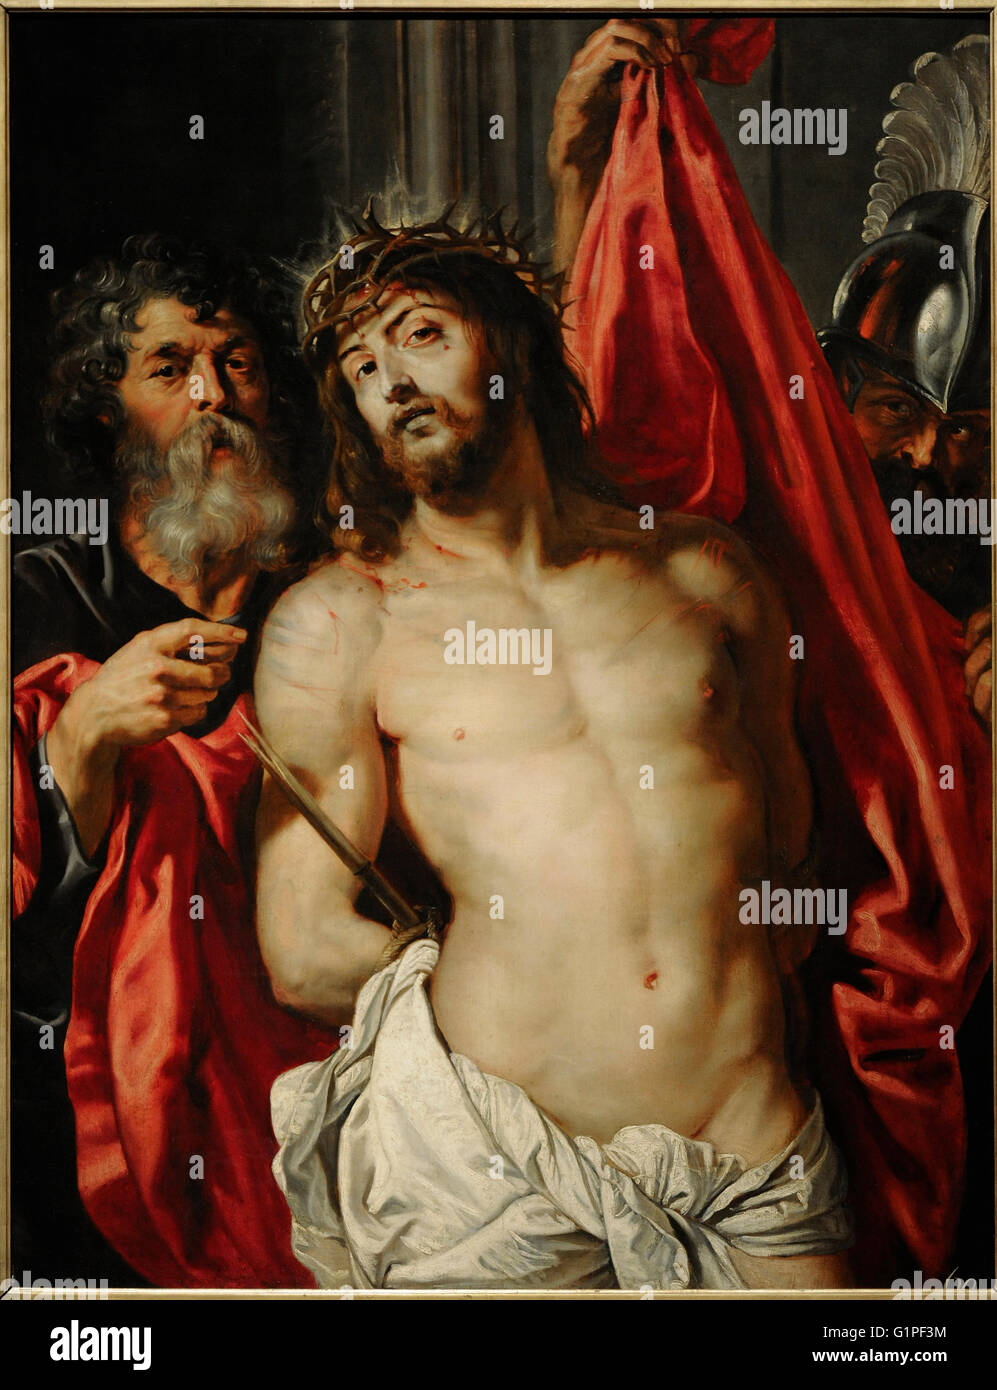 Peter Paul Rubens (1577-1640). Flemish Baroque painter. Christ Crowned with Thorns 'Ecce Homo', 1612. The State Hermitage Museum. Saint Petersburg. Russia. Stock Photo